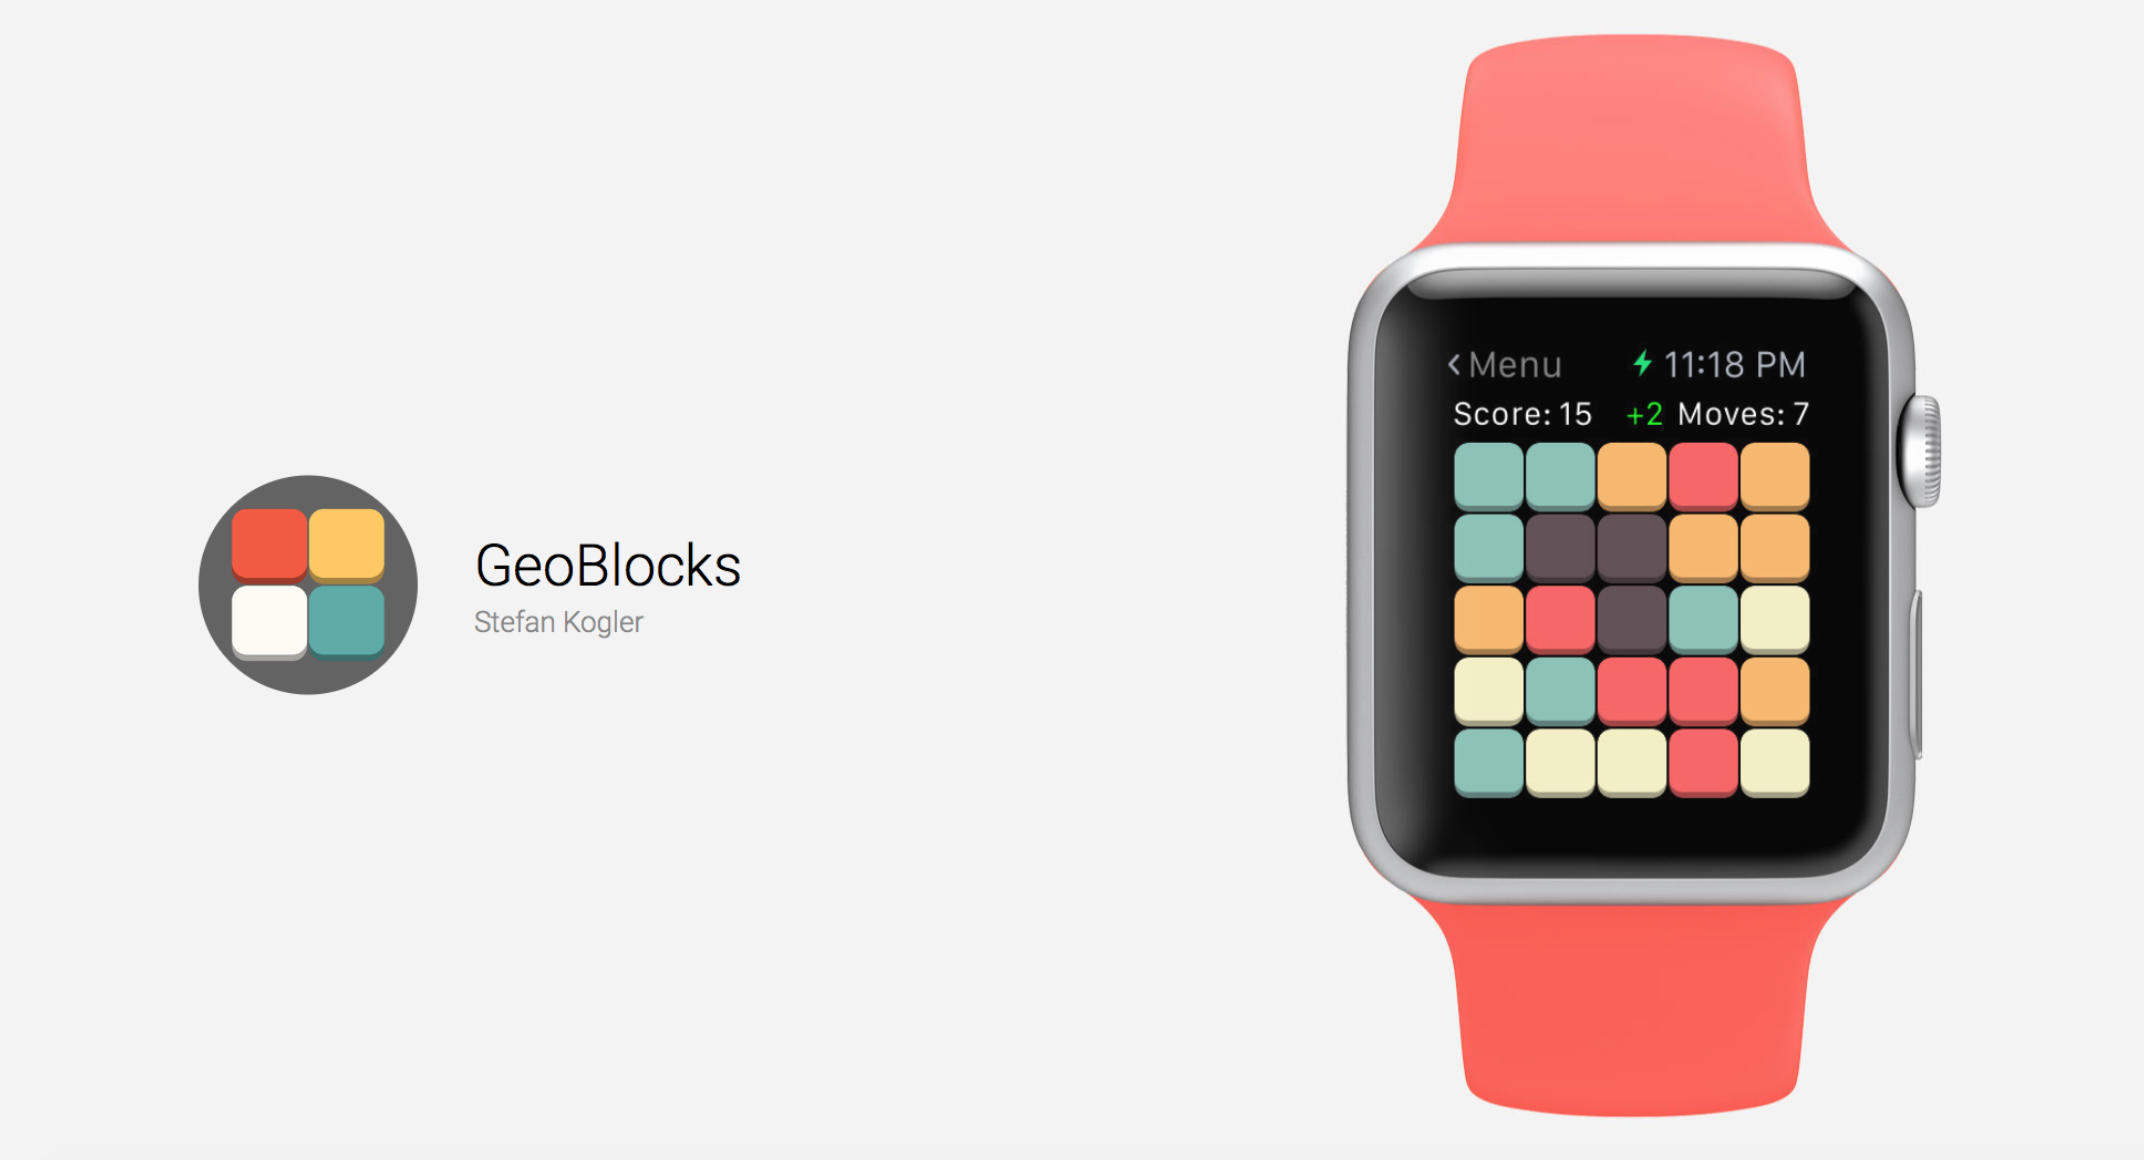 GeoBlocks Is a Simple, Appealing Game on the Apple Watch